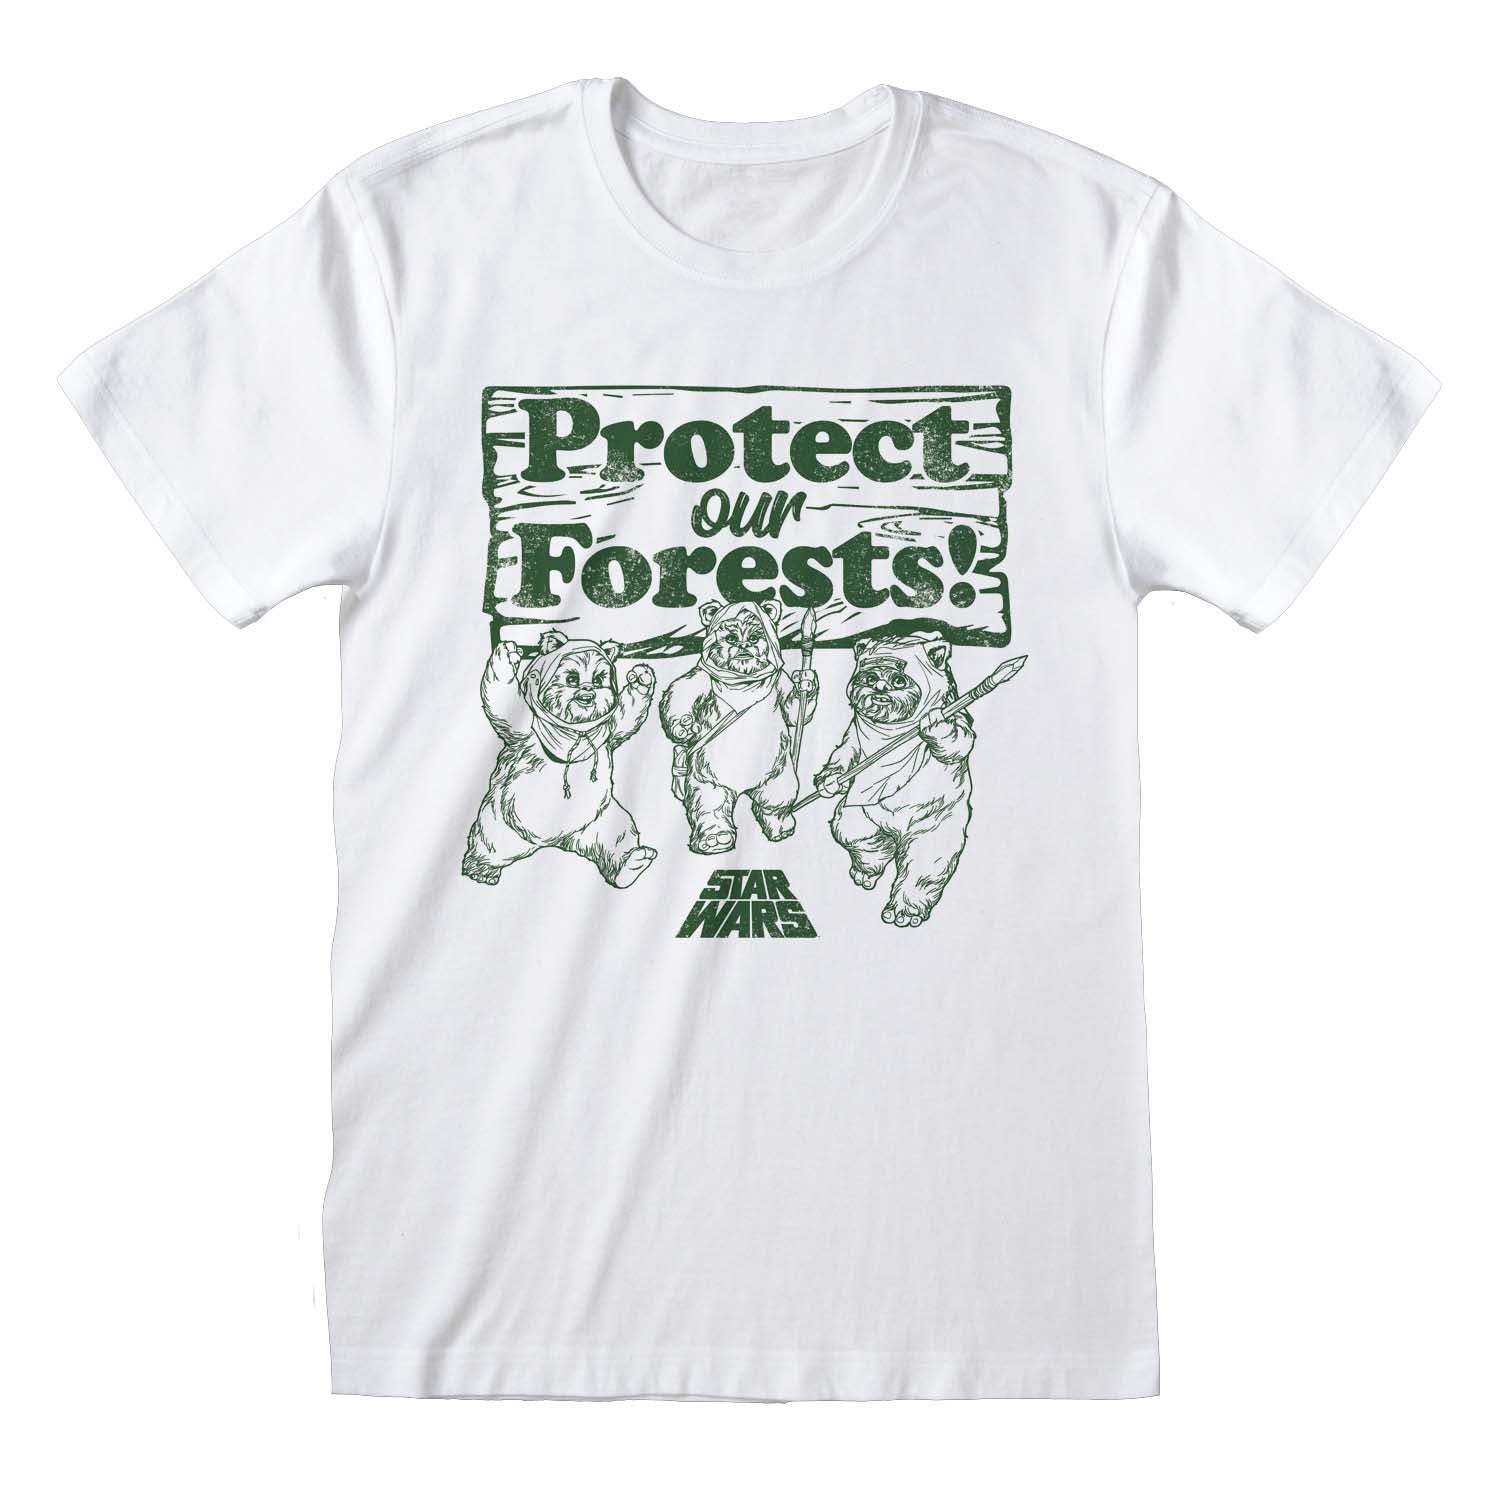 Protect Our Forest T-Shirt